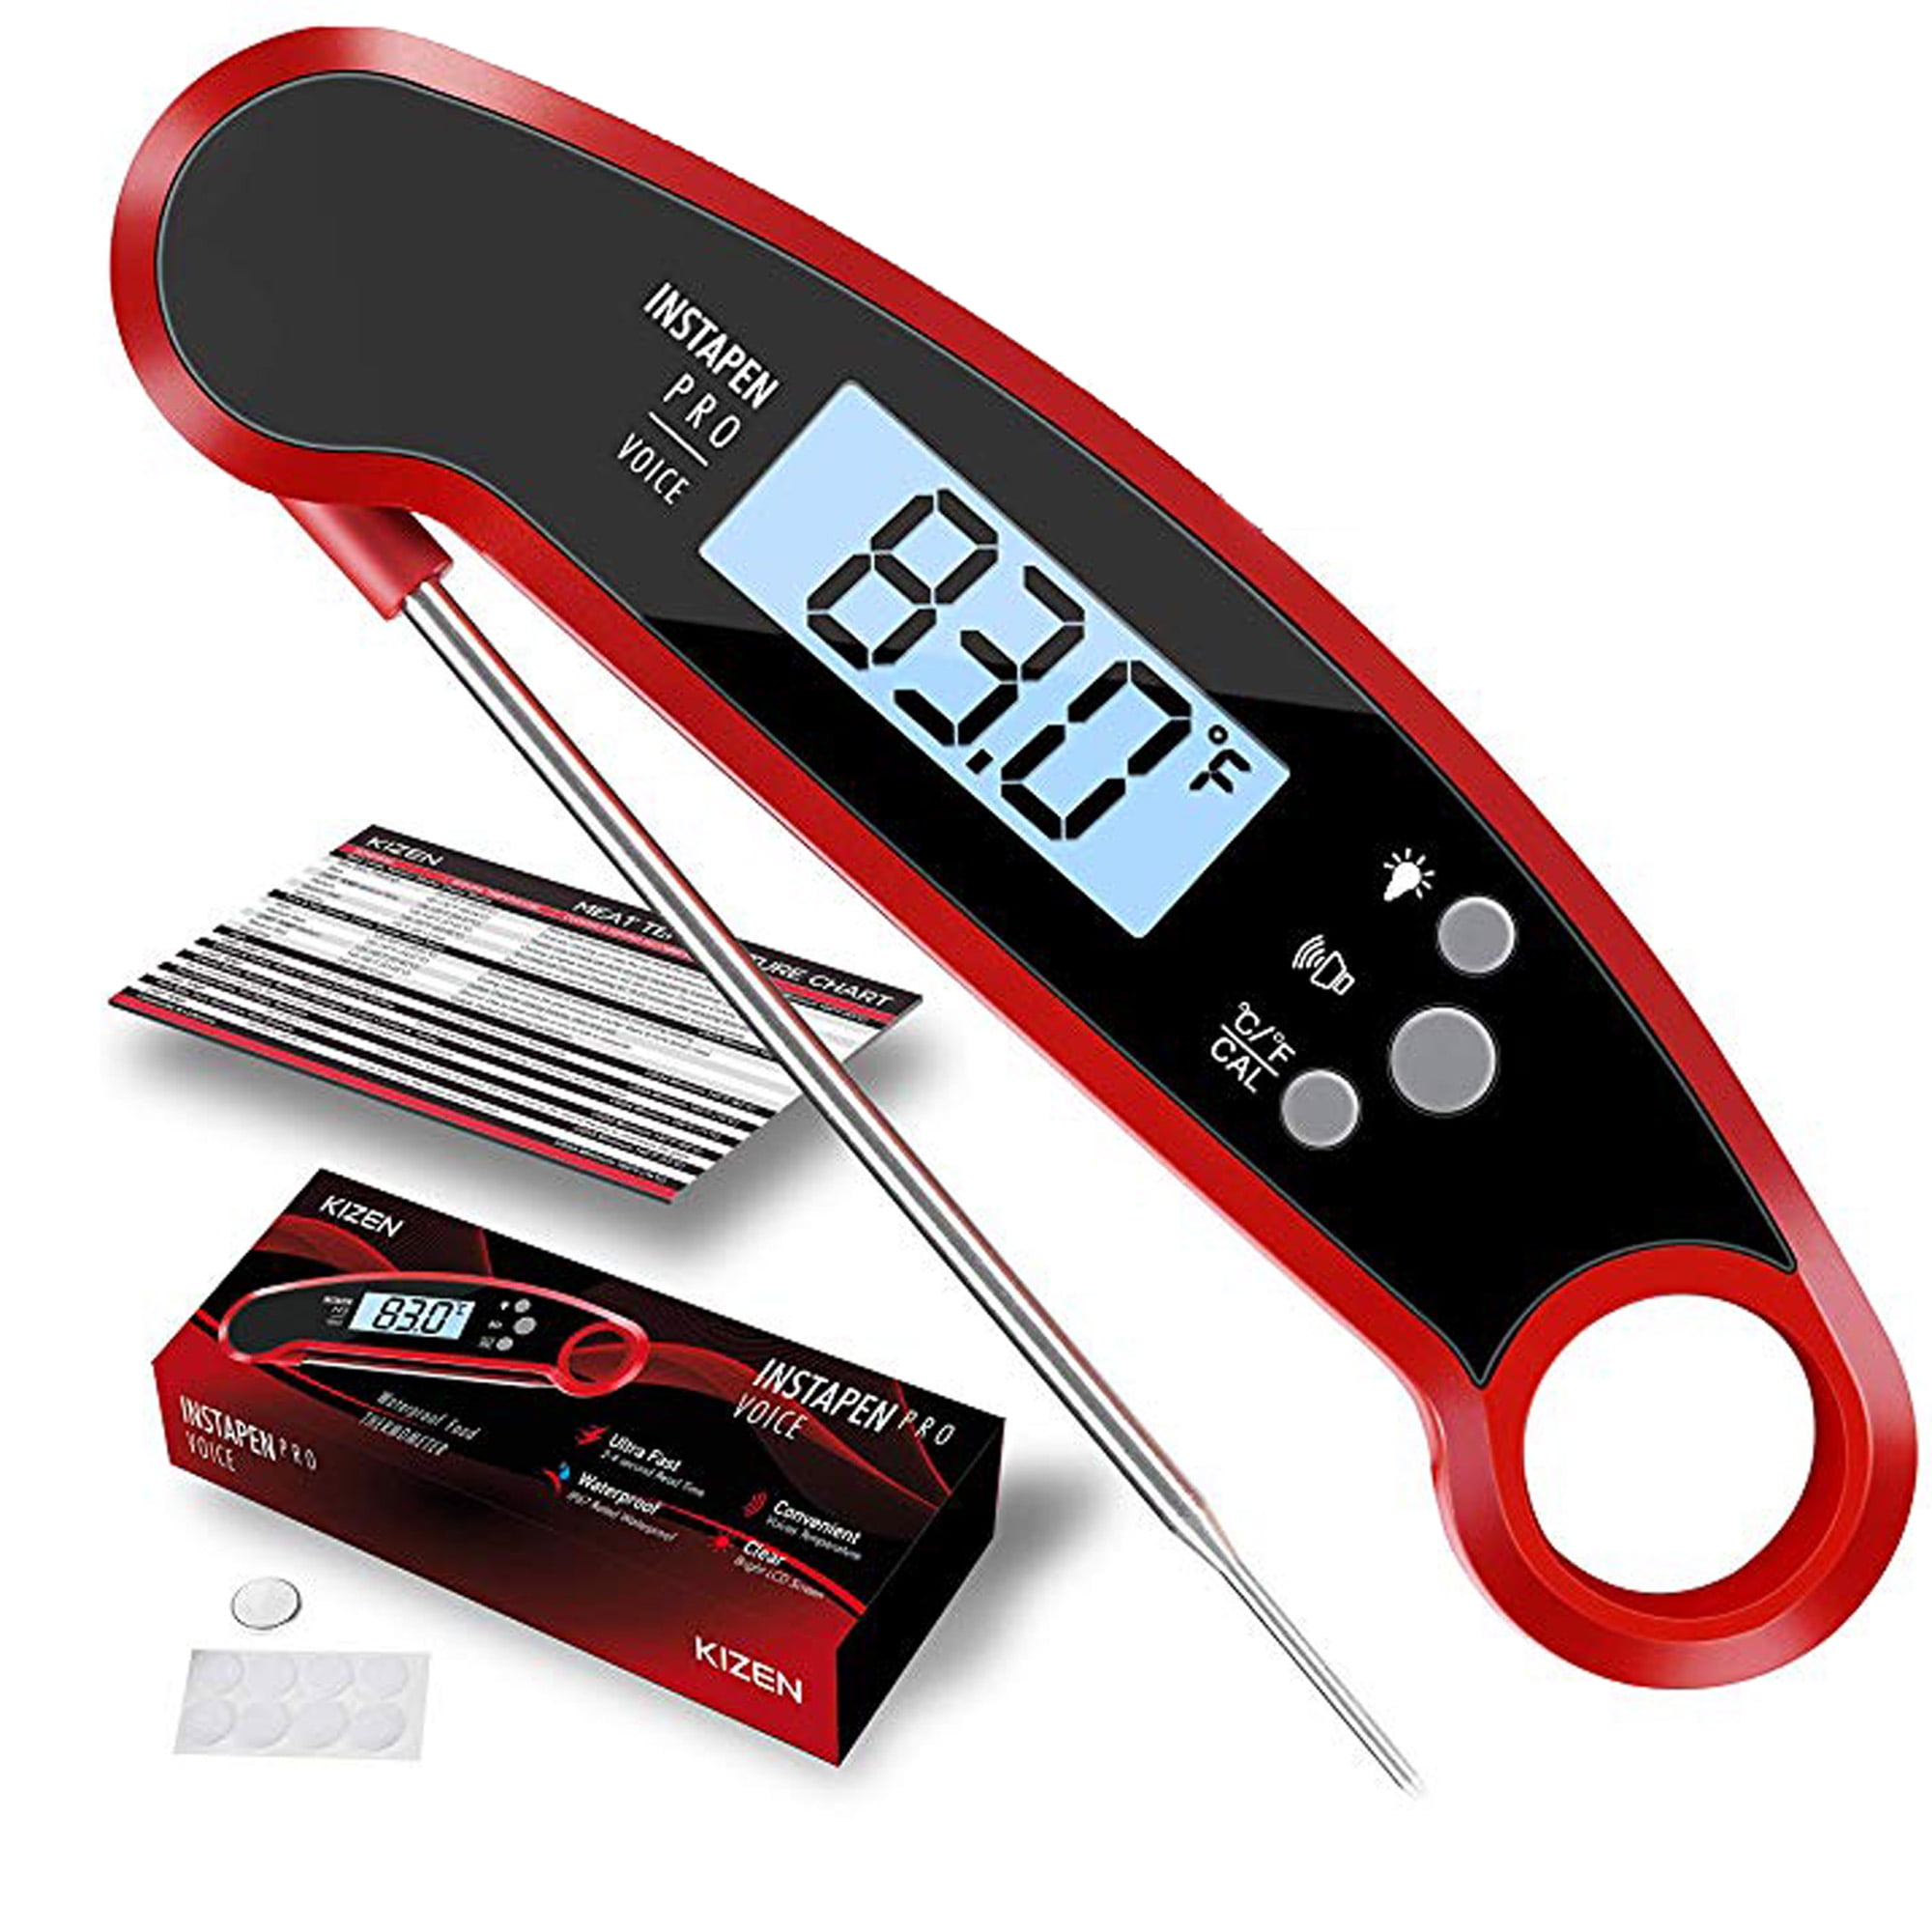 NK HOME Instant Read Meat Thermometer Best Waterproof Thermometer